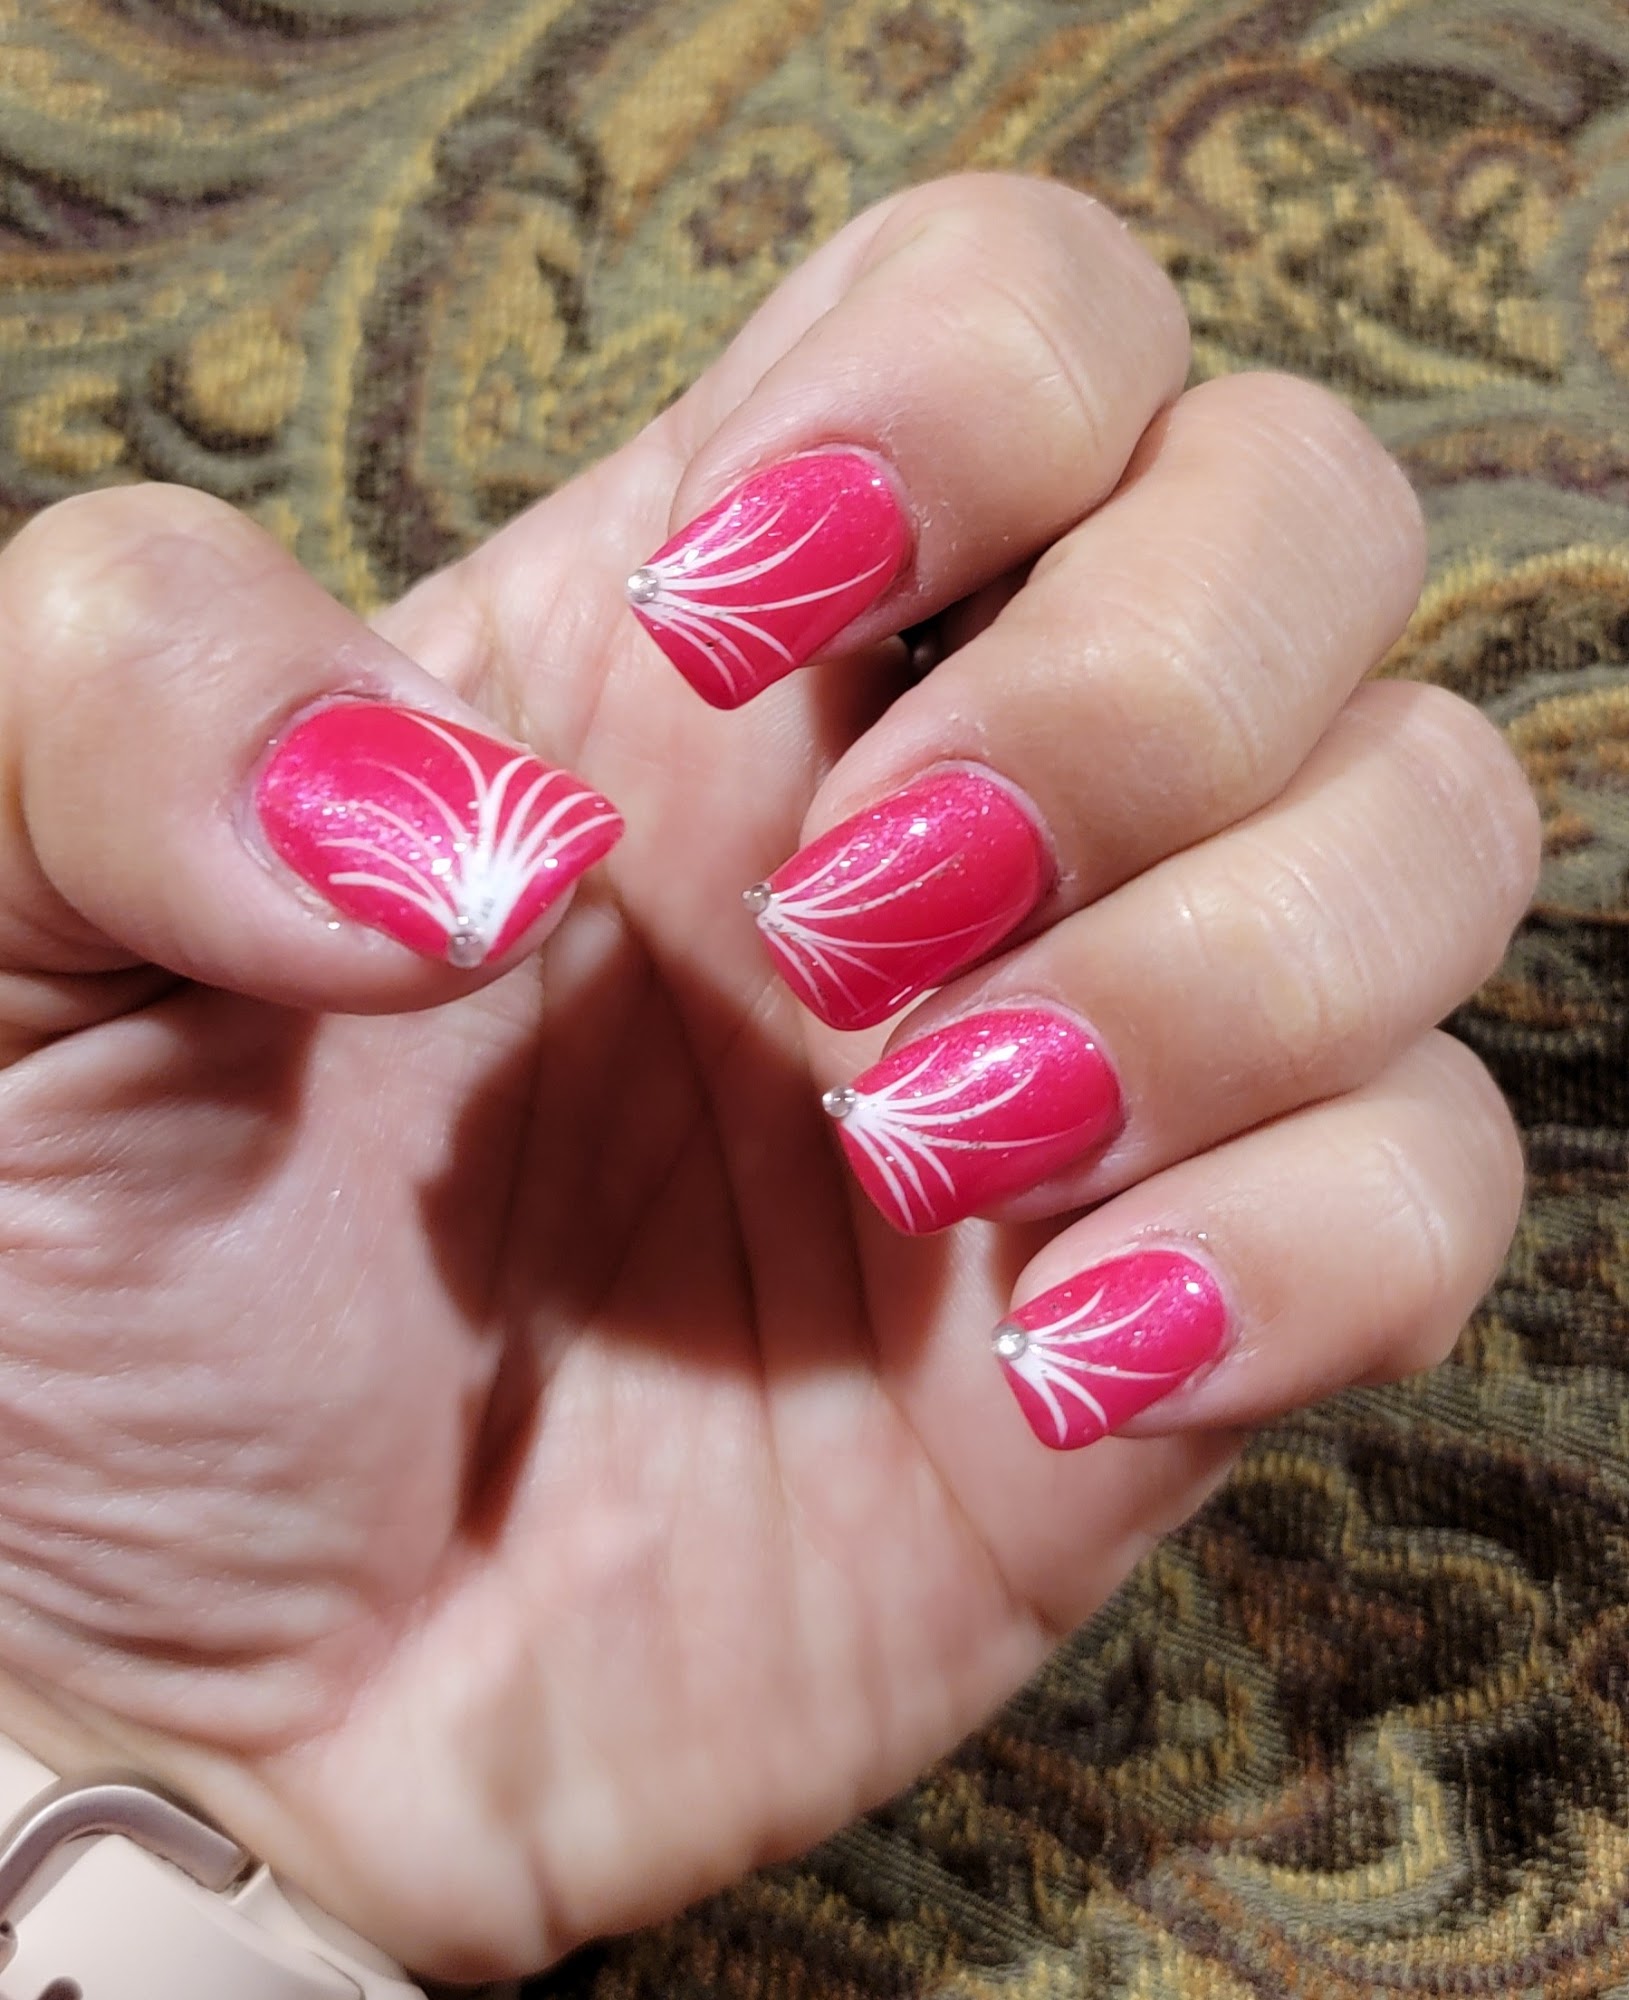 Fancy Nails 38500 Tanger Dr, North Branch Minnesota 55056